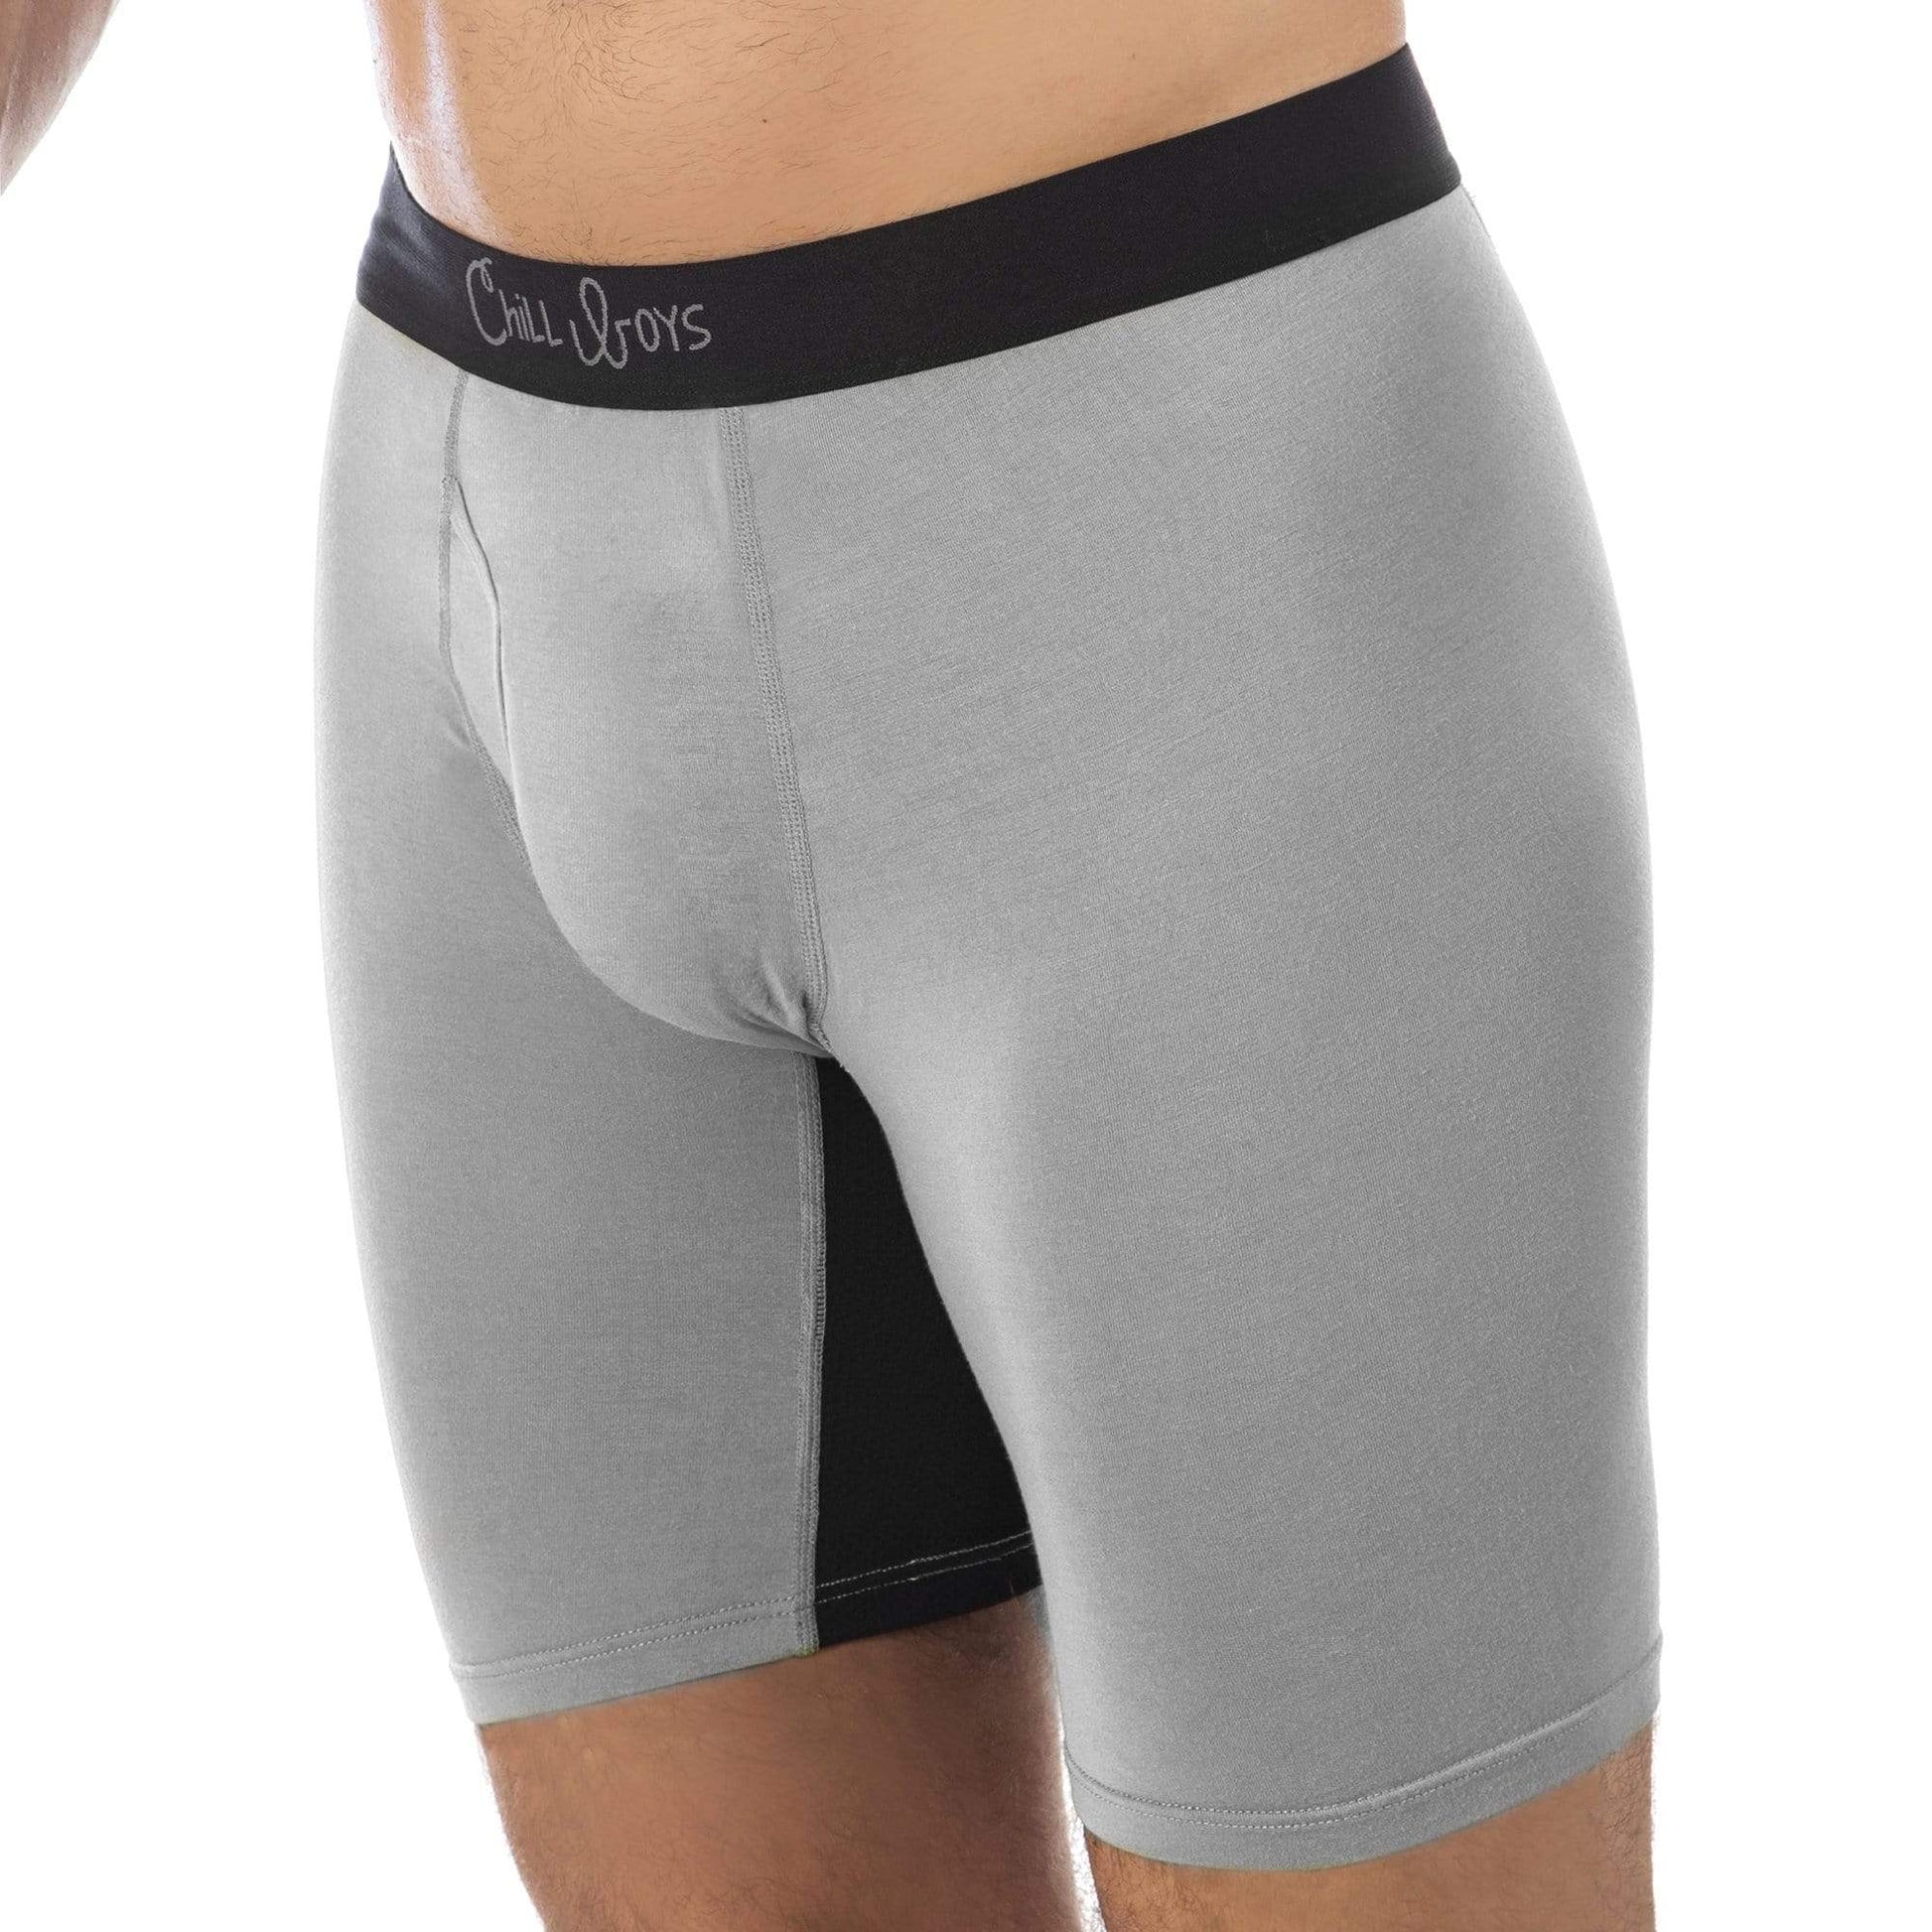 Buy Soft & Anti-Chafing Bamboo Boxer Briefs For Men - Chill Boys